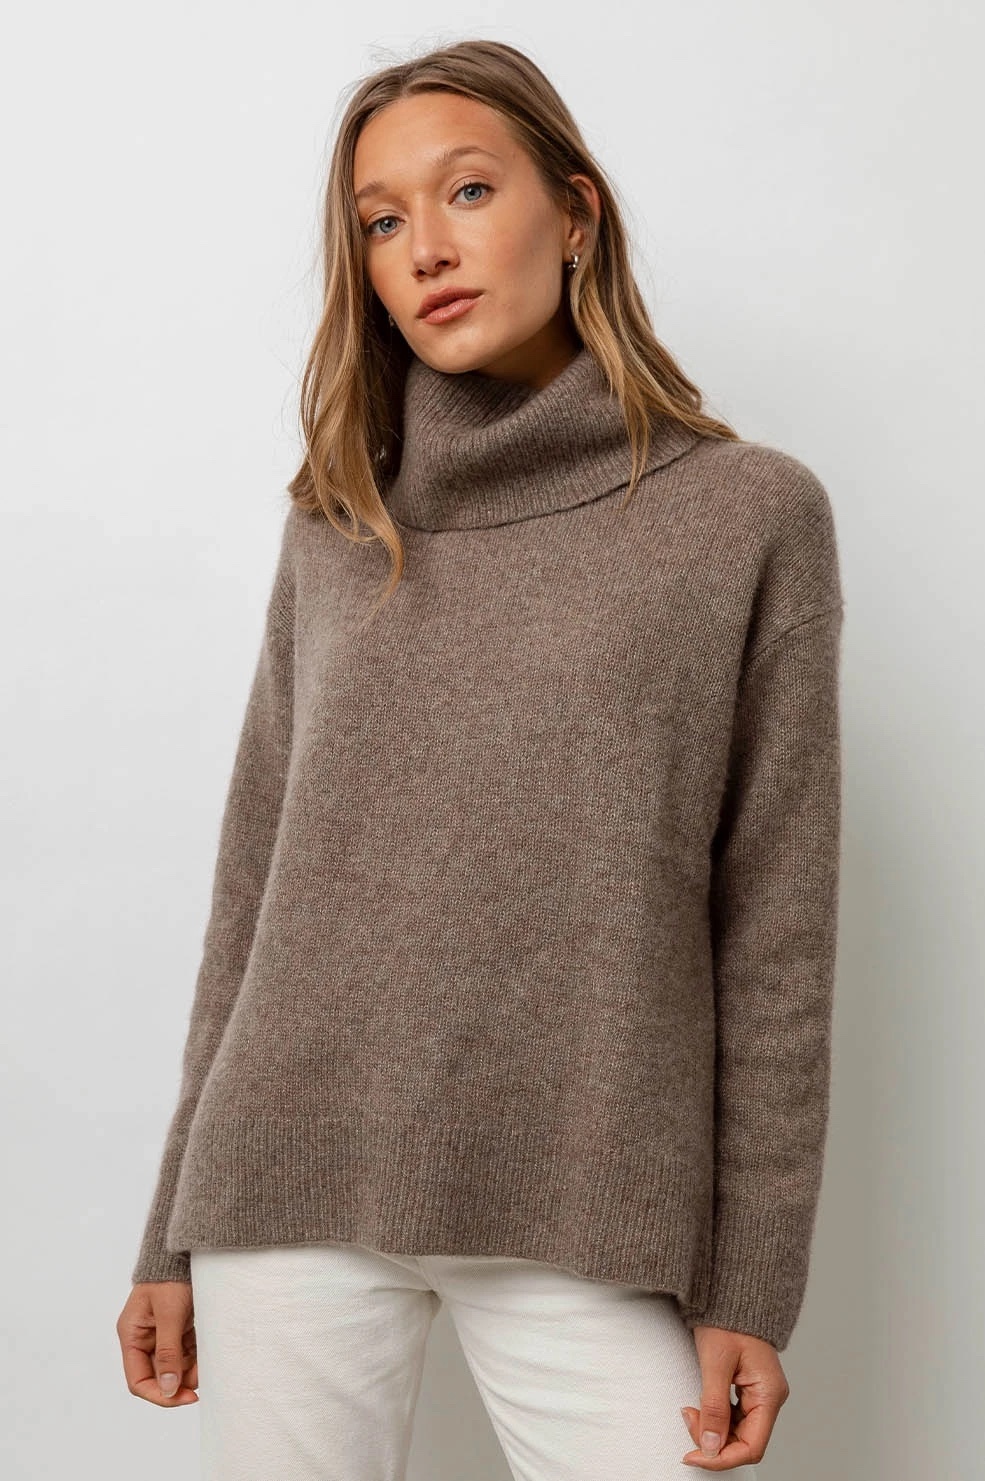 Knit Picks! Our favorite sweaters for looking cool and keeping warm ...